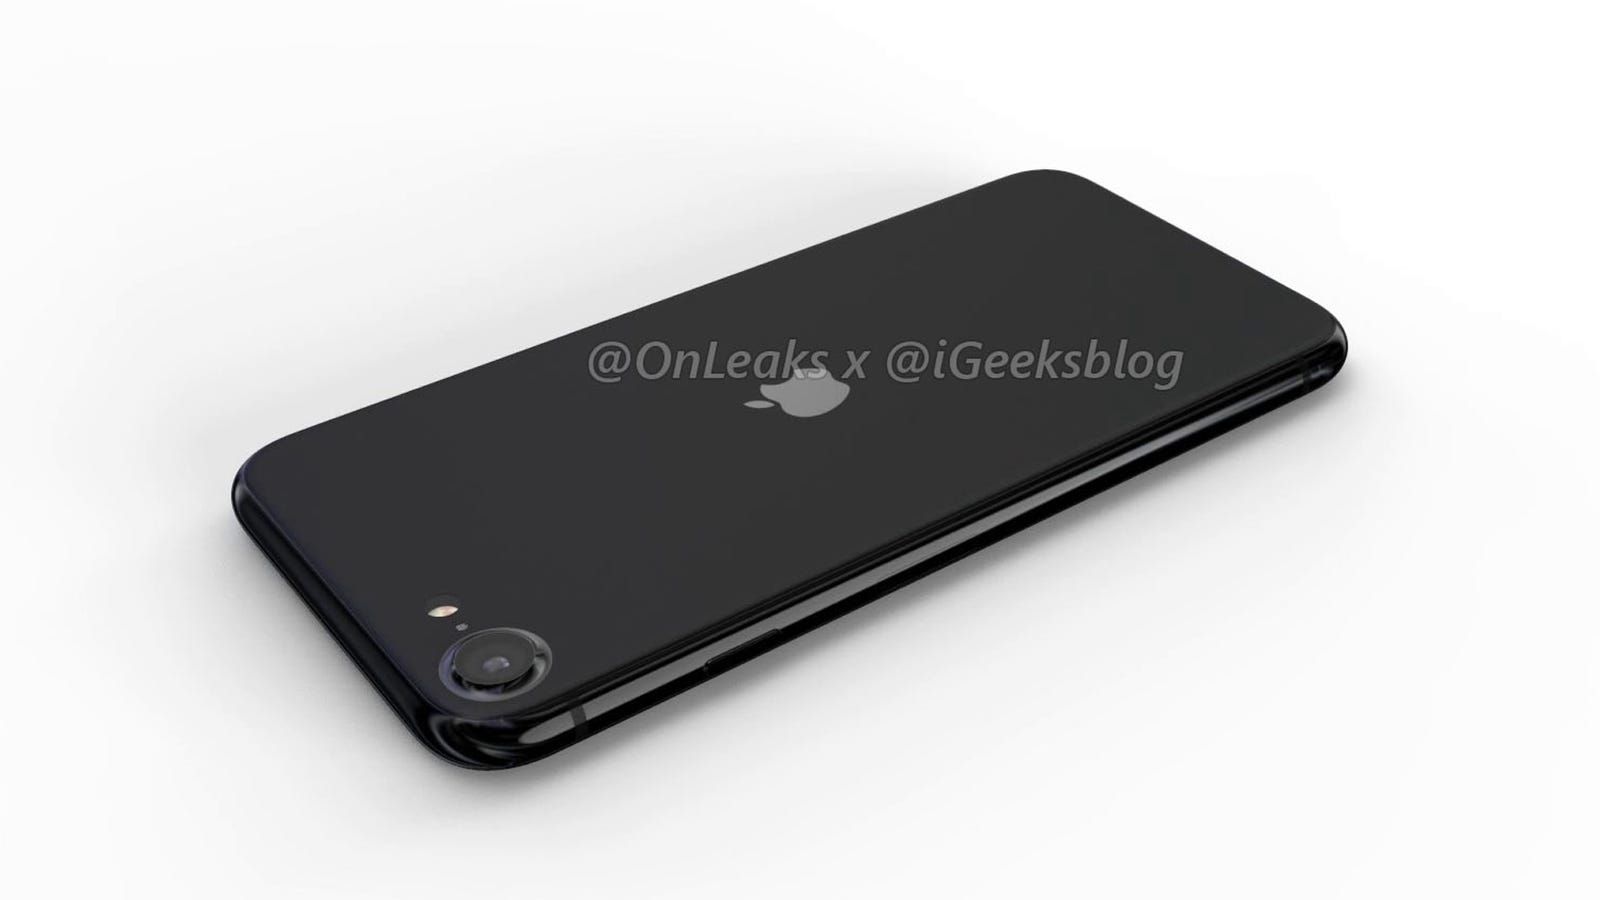 This would be the new "cheap" iPhone that Apple will launch this year